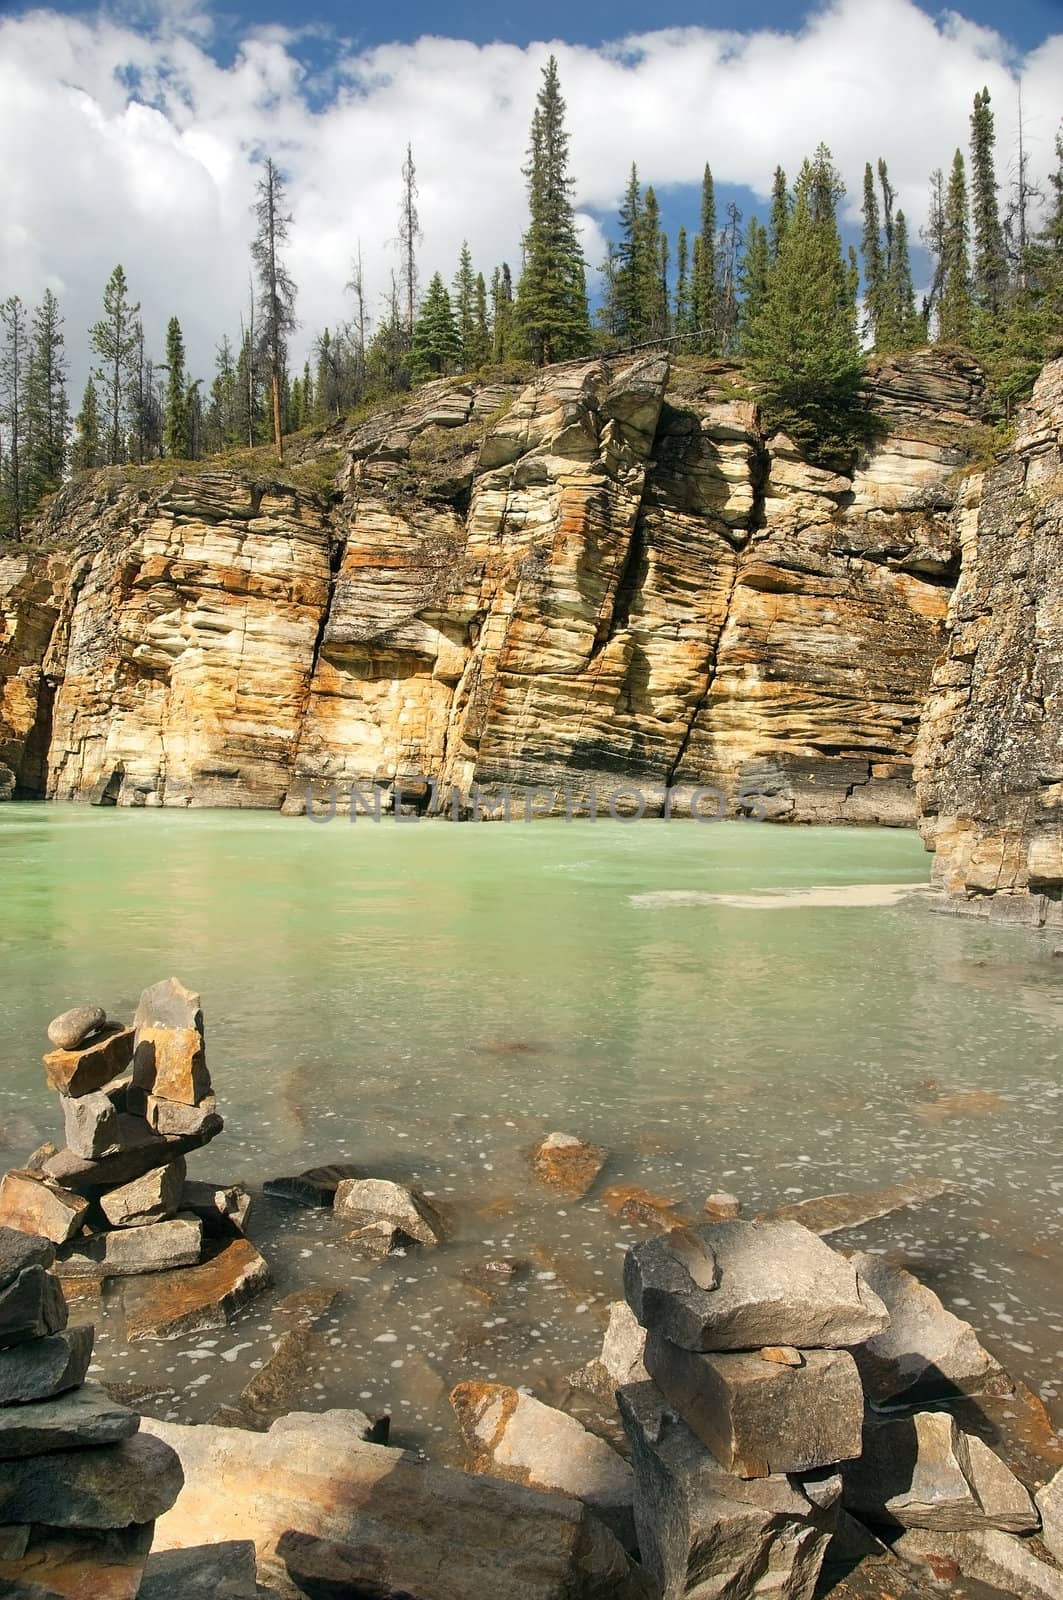 rocky shores of a mountain river in the Canadian Rockies